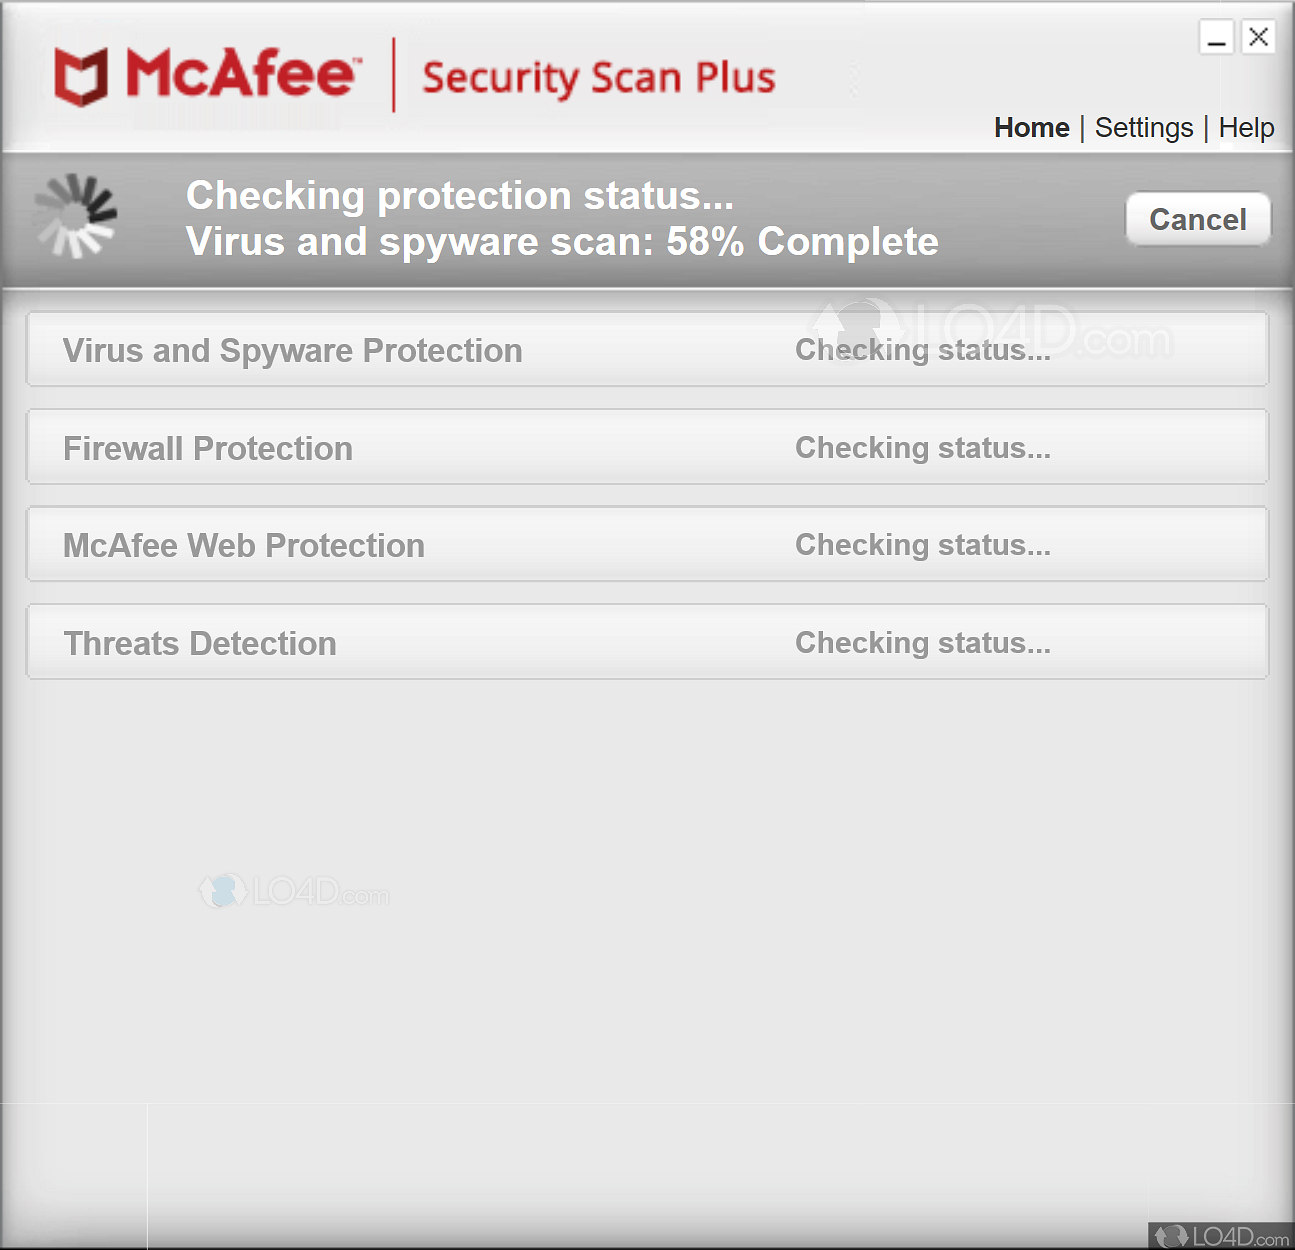 uninstall mcafee security scan plus